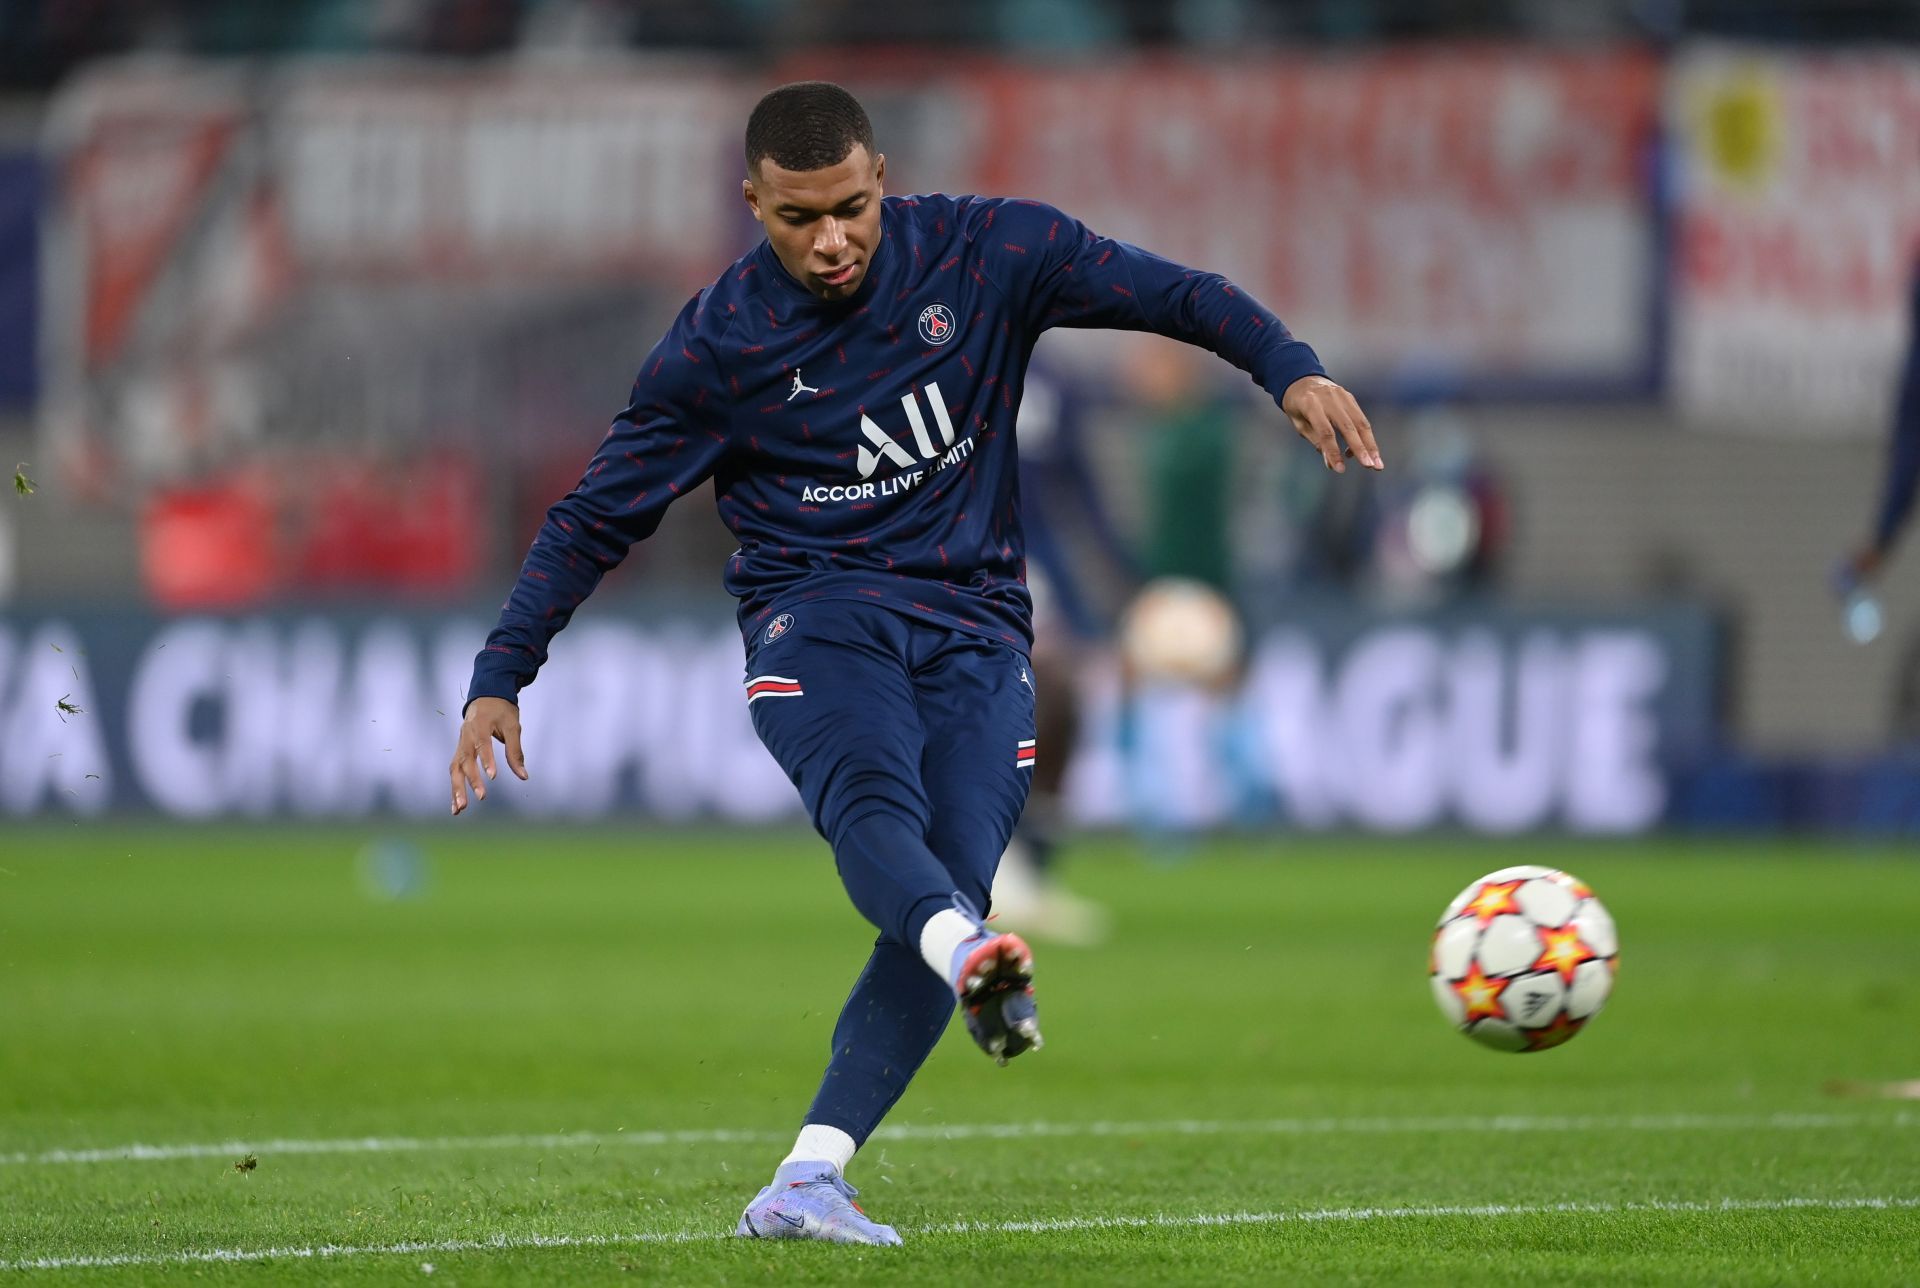 Kylian Mbappe could sign for Real Madrid as early as January.